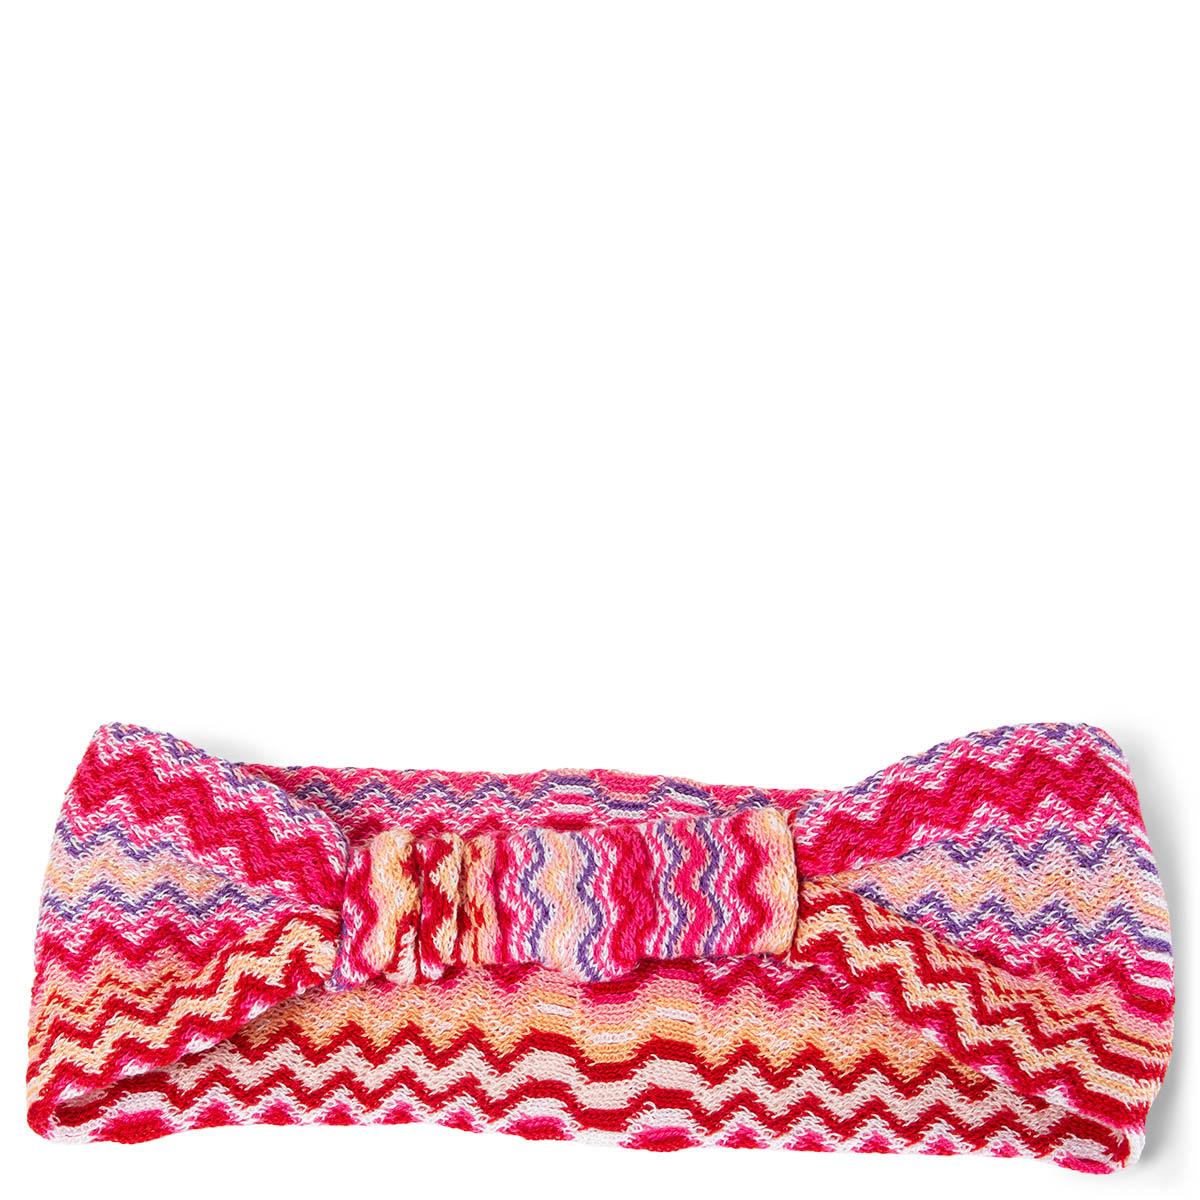 100% authentic Missoni zig zag headband in pink, salmon, red, lilac and white wool (50%) and acrylic (50%). Elastic band on the back. Has never been worn and is in virtually new condition. 

All our listings include only the listed item unless